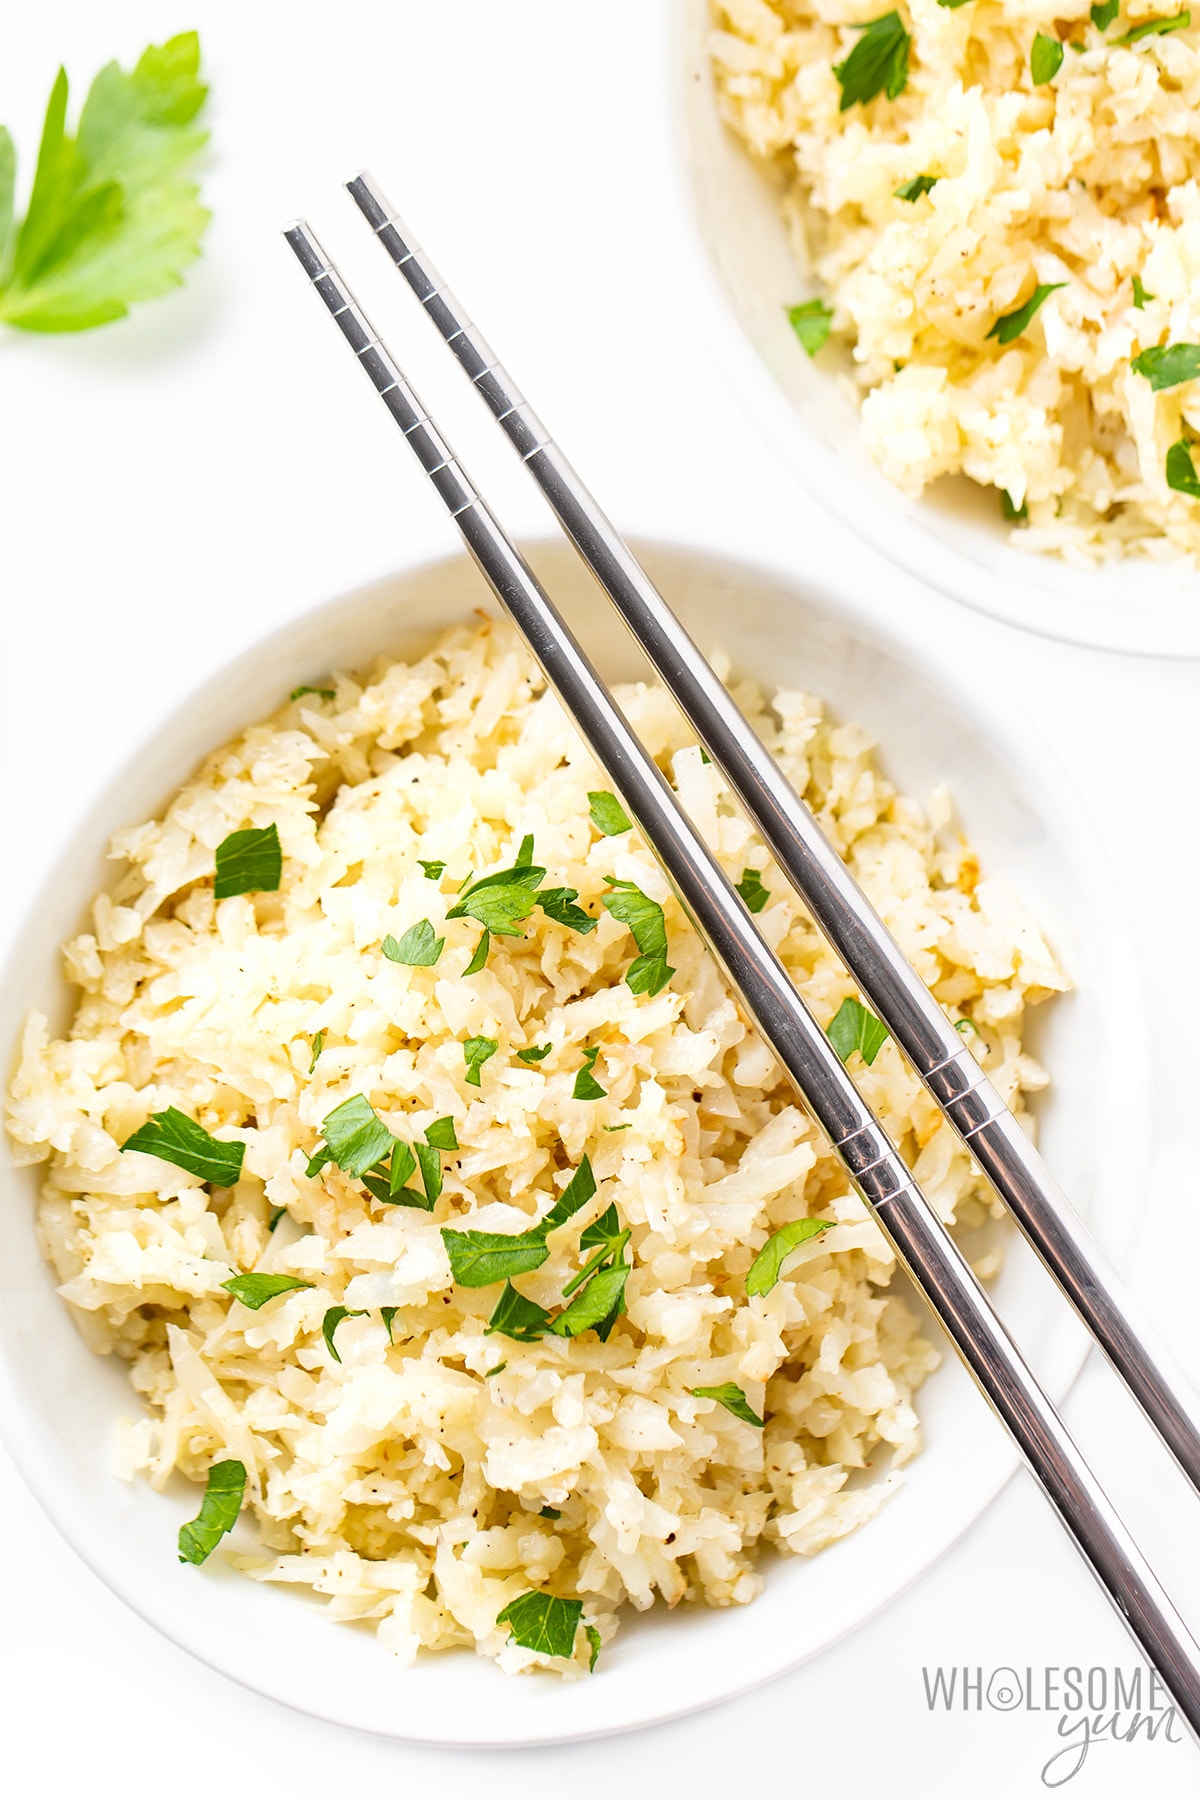 Riced cauliflower in two bowls with chopsticks.